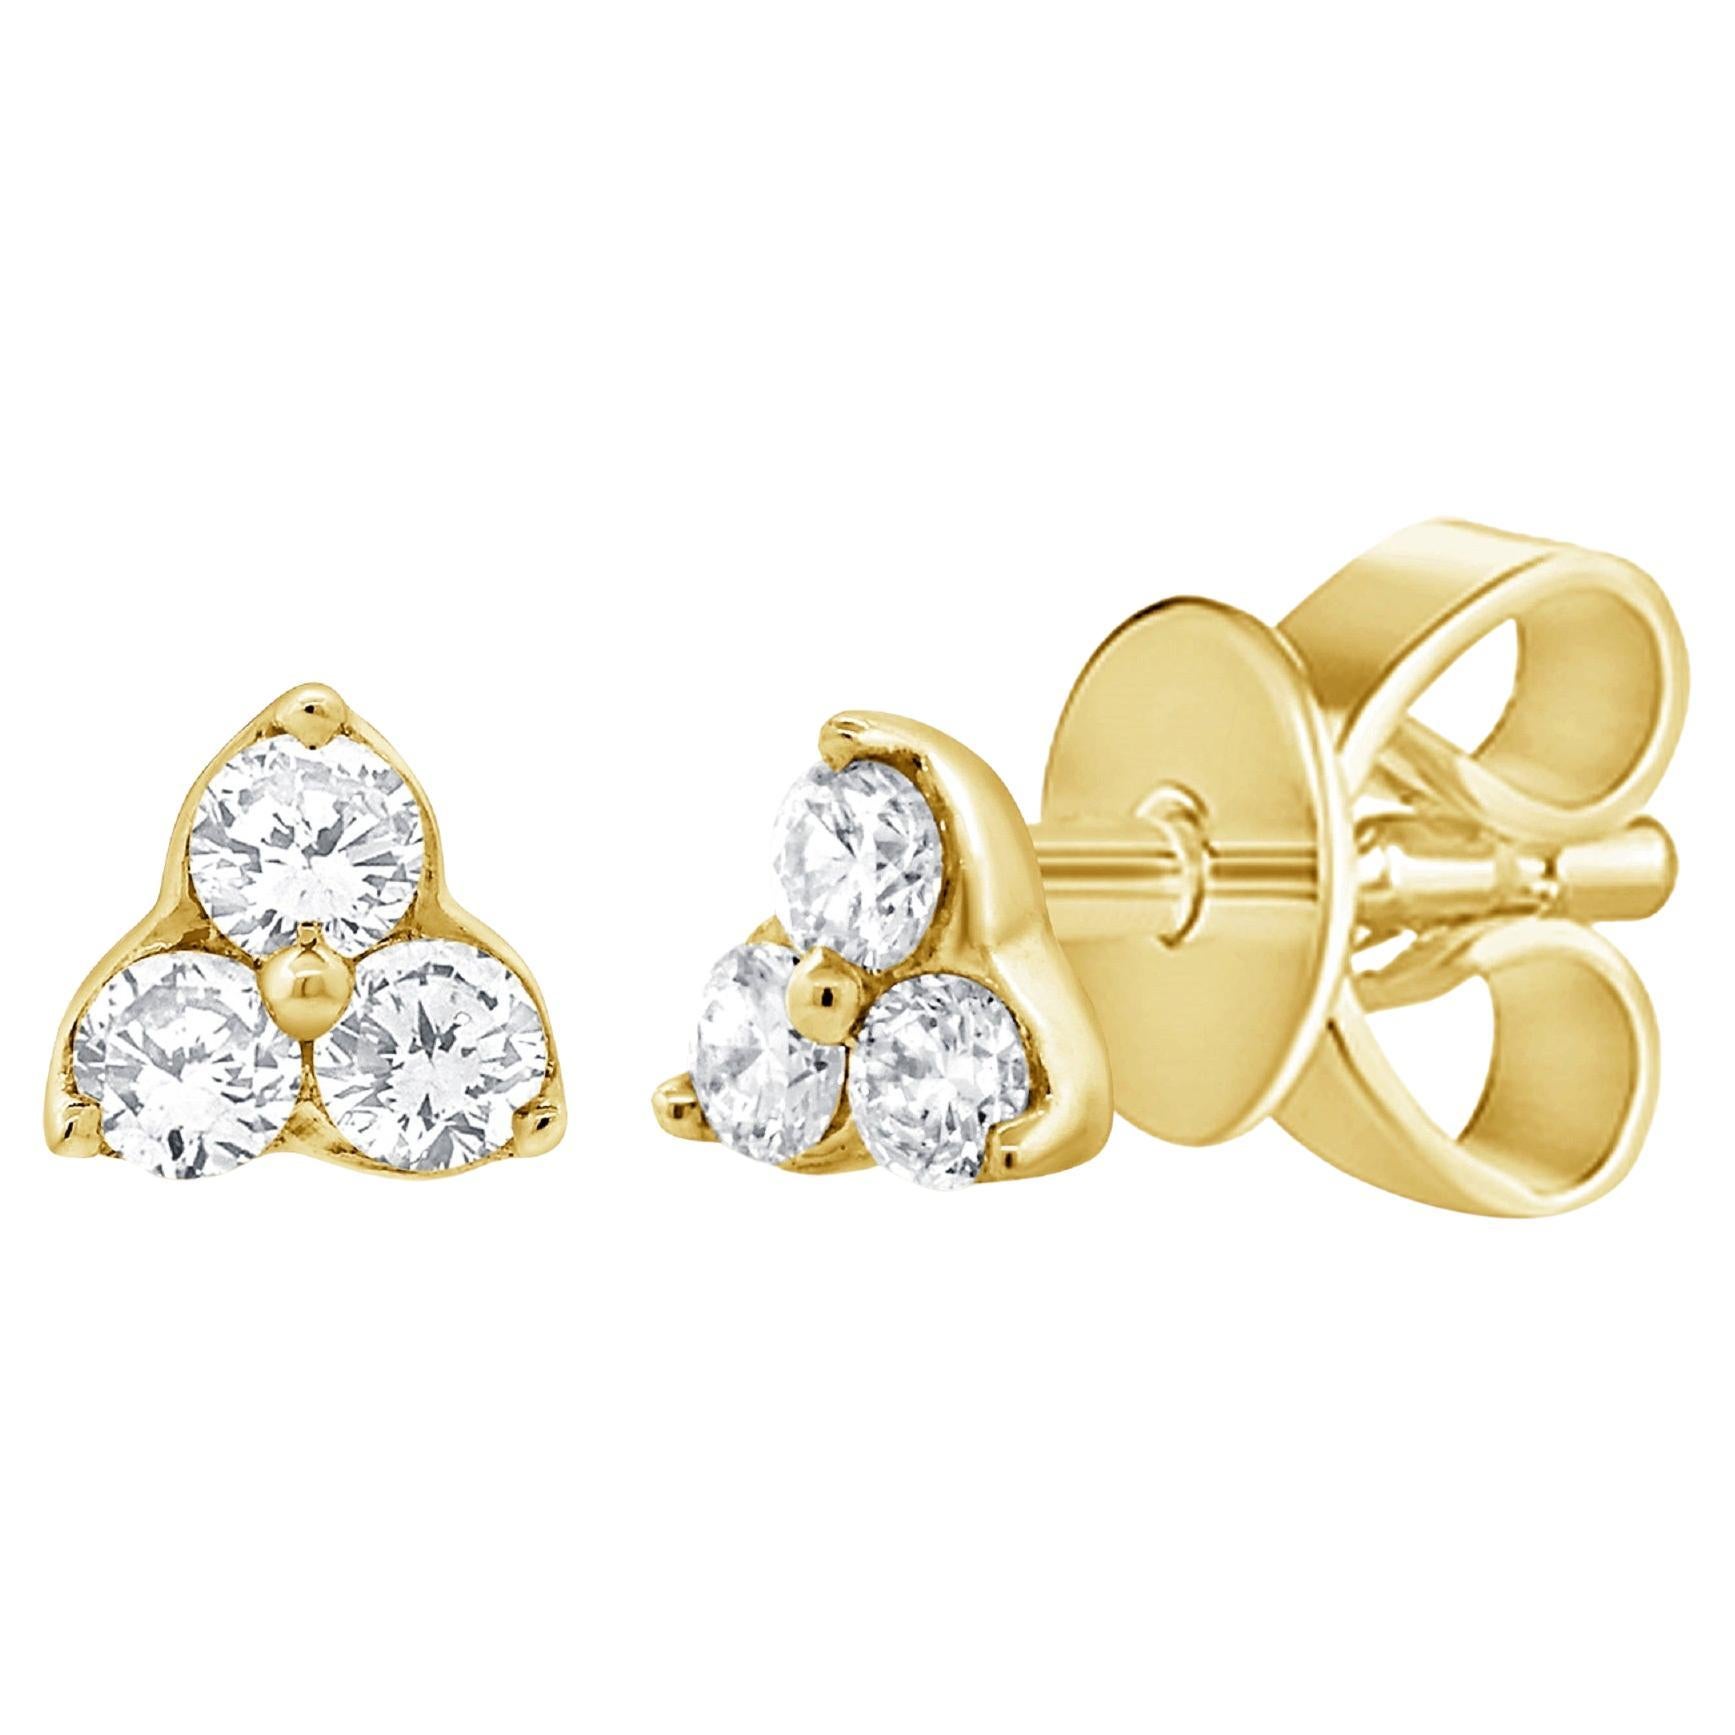 14K Yellow Gold 3 Stone 0.05ct Diamond Stud Earrings for Her